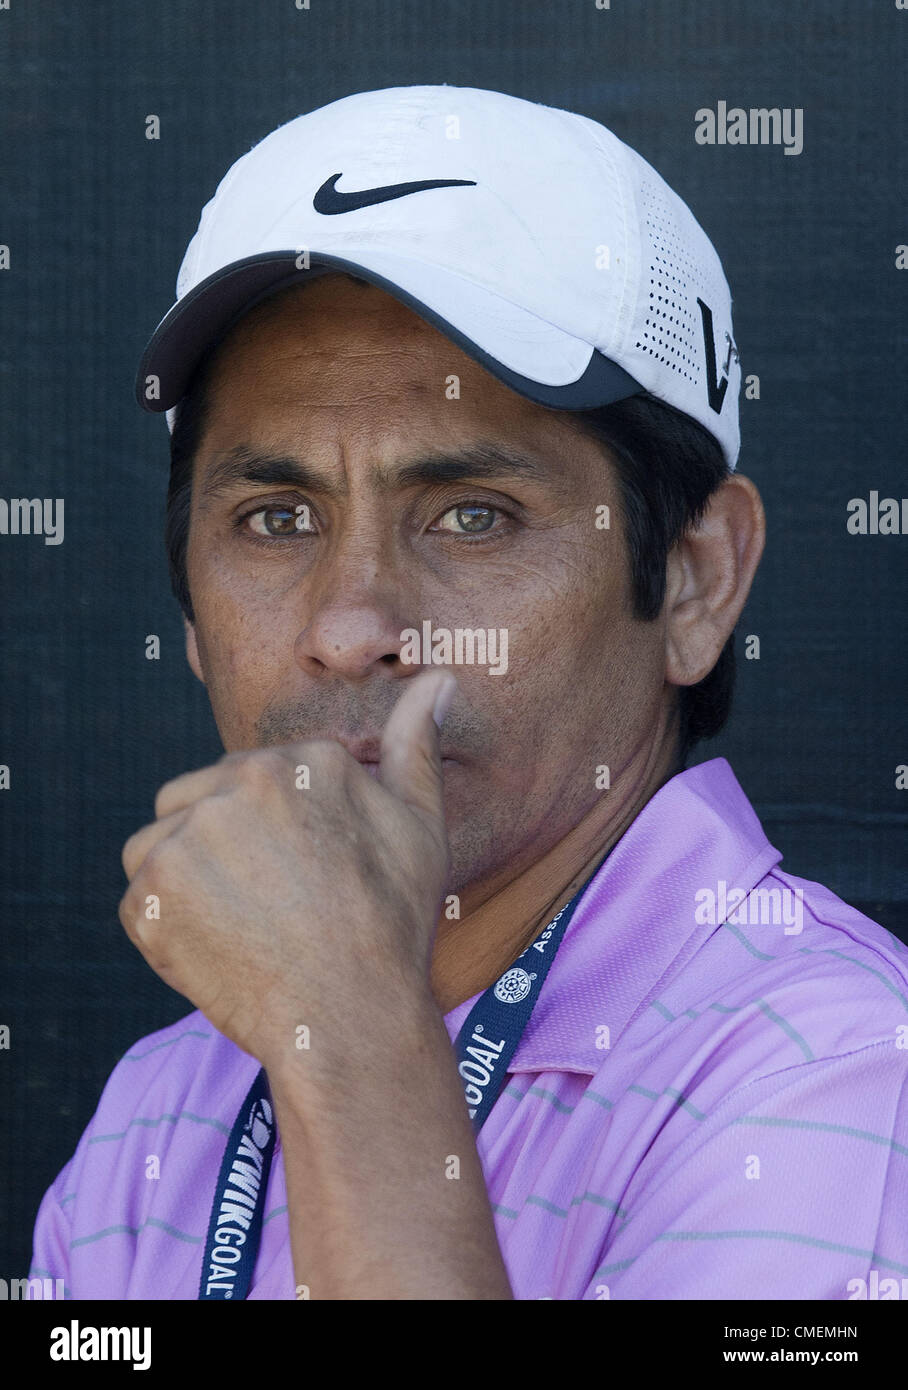 July 30, 2012 - Los Angeles, California, USA - Mexican goalie legend Jorge Campos attends the Real Madrid training session at the UCLA campus in Los Angeles, California, Monday, 30 July 2012. (Credit Image: © Javier Rojas/Prensa Internacional/ZUMAPRESS.com) Stock Photo